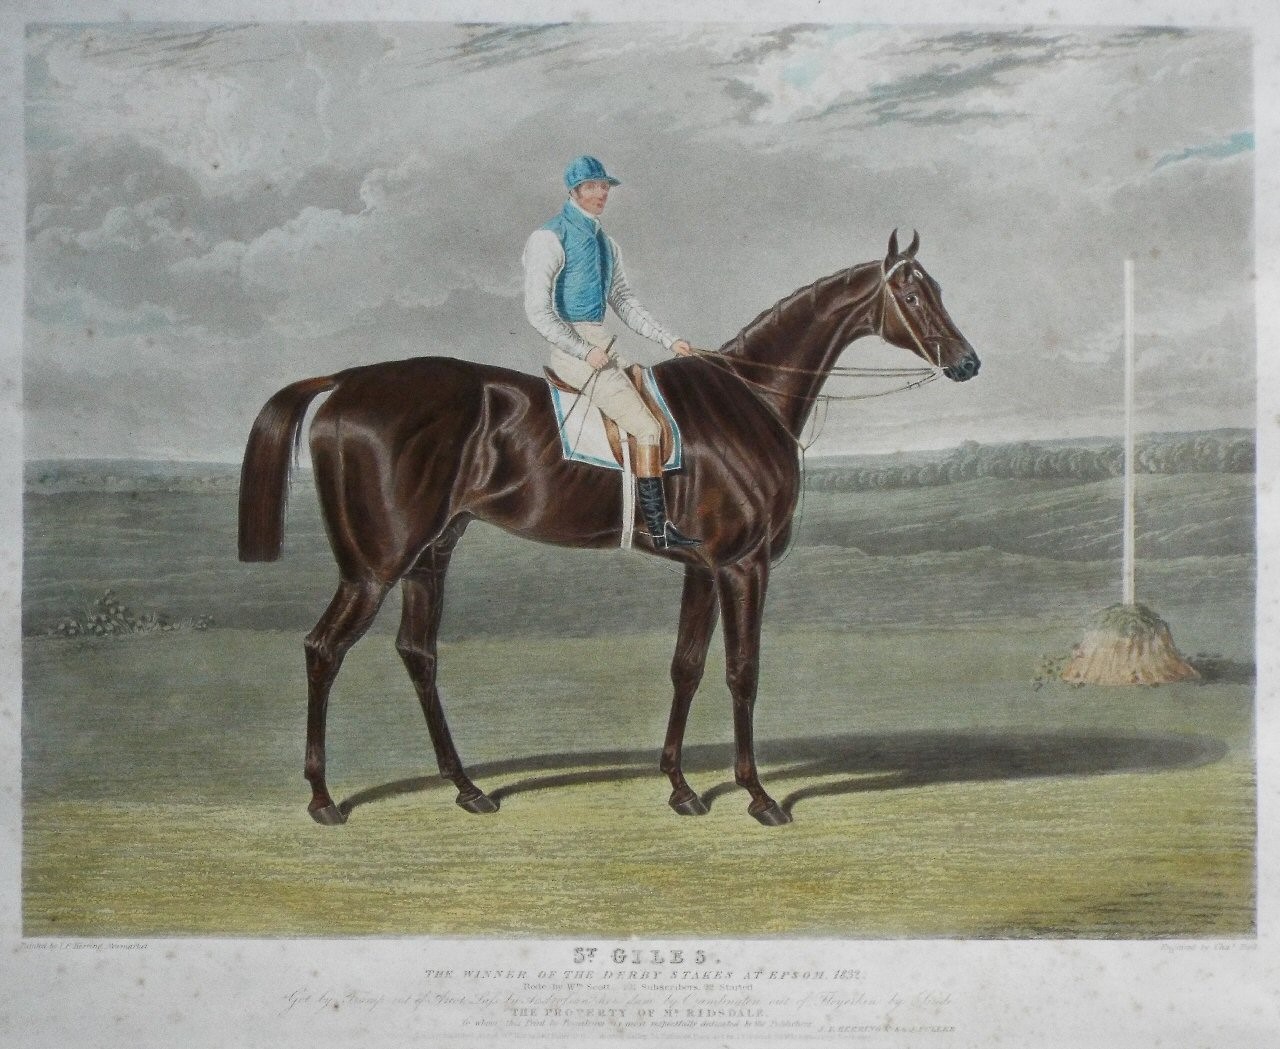 Aquatint - St. Giles, the Winner of the Derby Stakes at Epsom, 1832. - Hunt